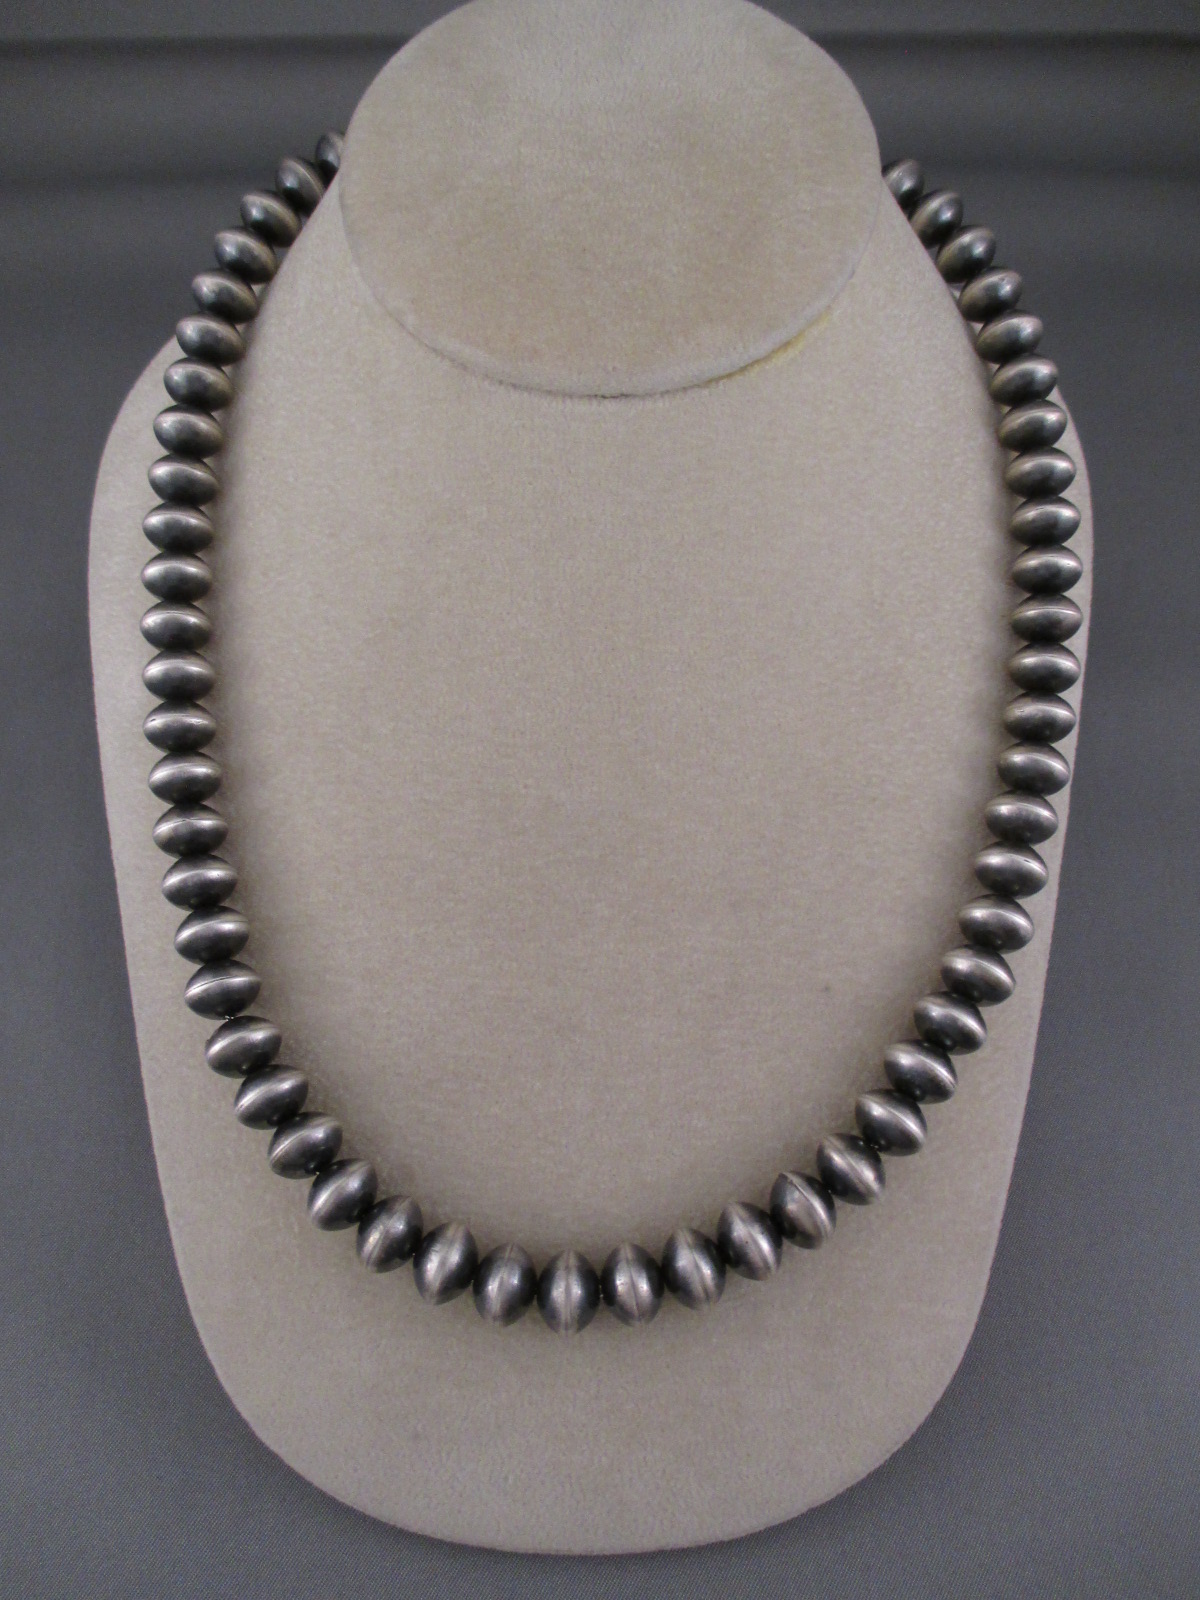 Oxidized Sterling Silver Necklace, Navajo Indian Jewelry - 20